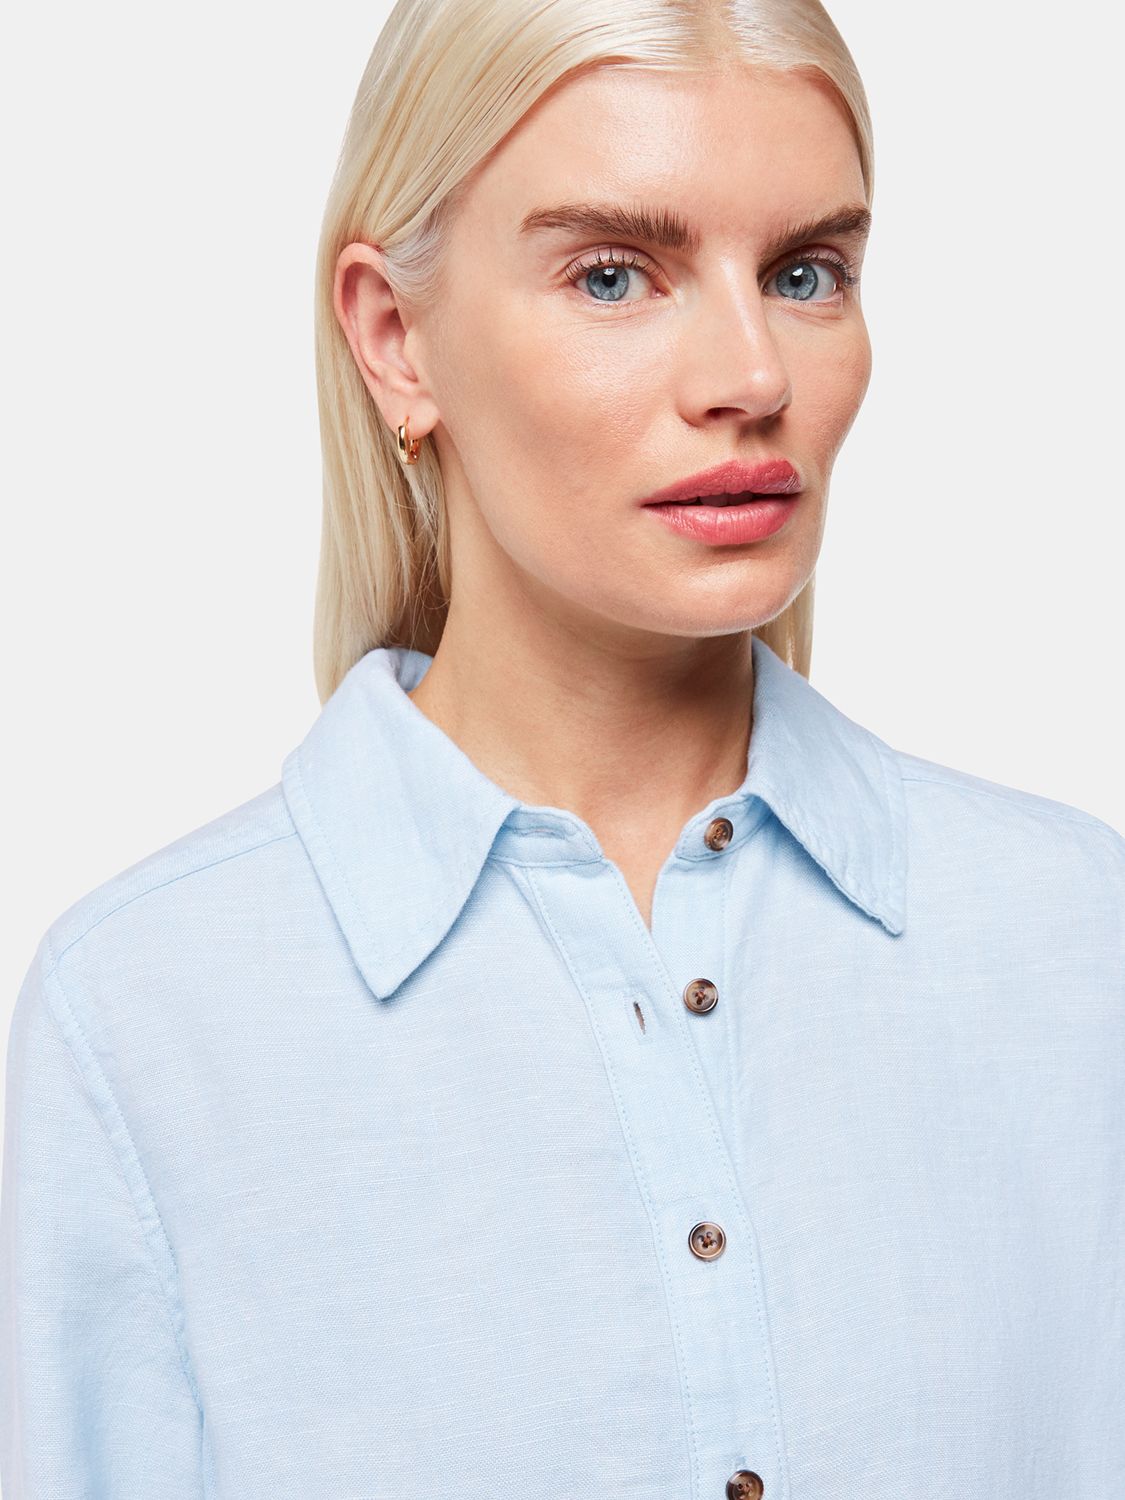 Whistles Petite Relaxed Fit Linen Shirt, Blue, 6